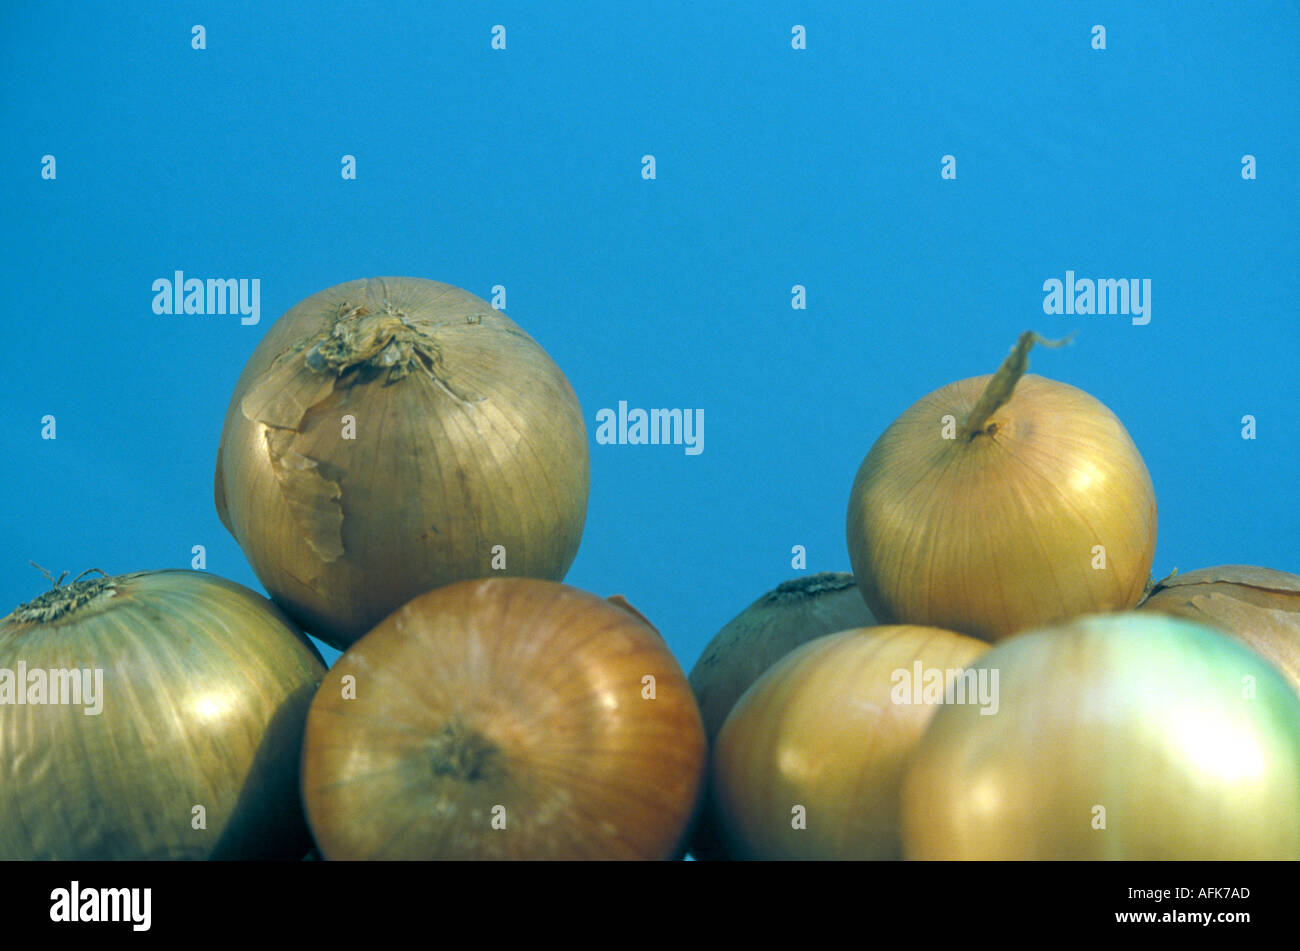 Onions against a blue background Stock Photo